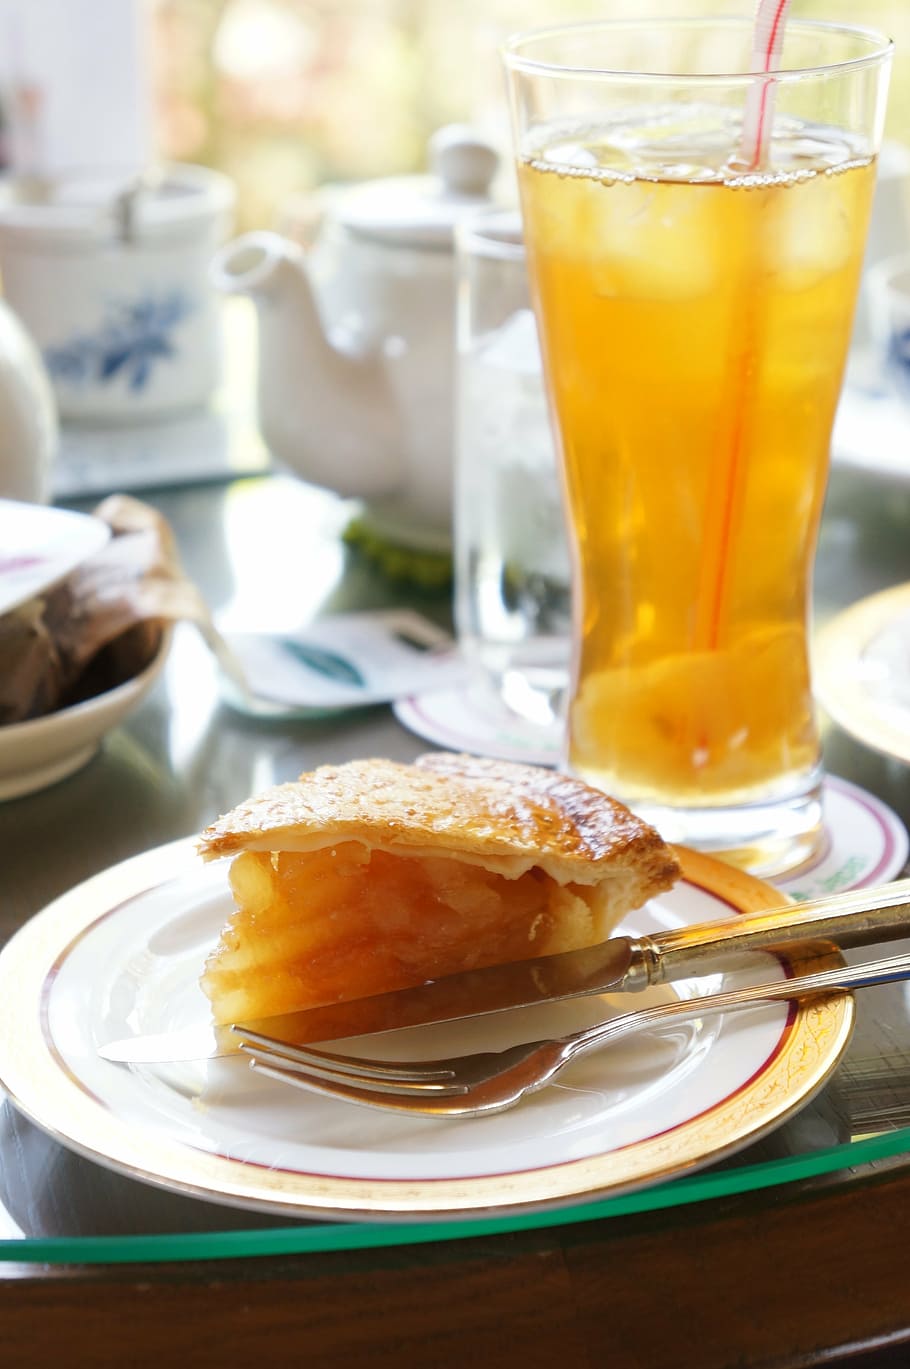 apple pie, afternoon tea, cake, cafe, food and drink, plate, HD wallpaper